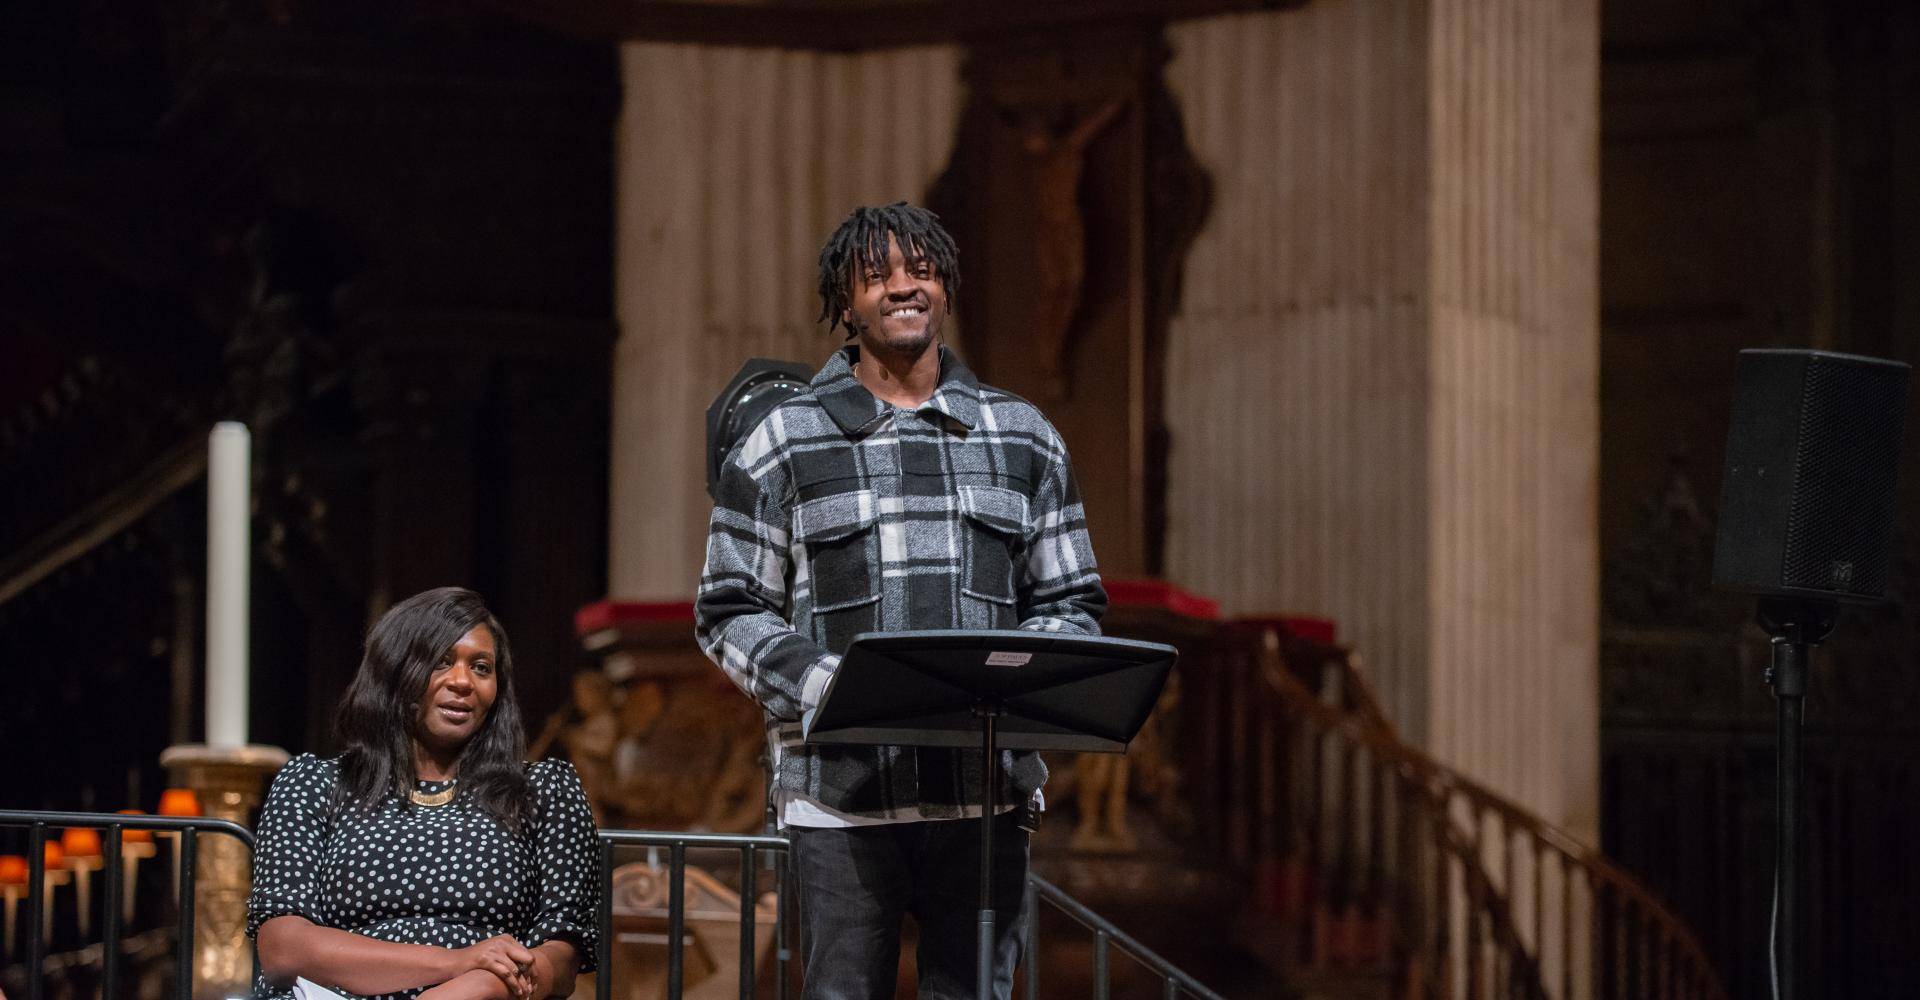 Musician Guvna B speaking at St Paul's Cathedral with Chine McDonald alongside